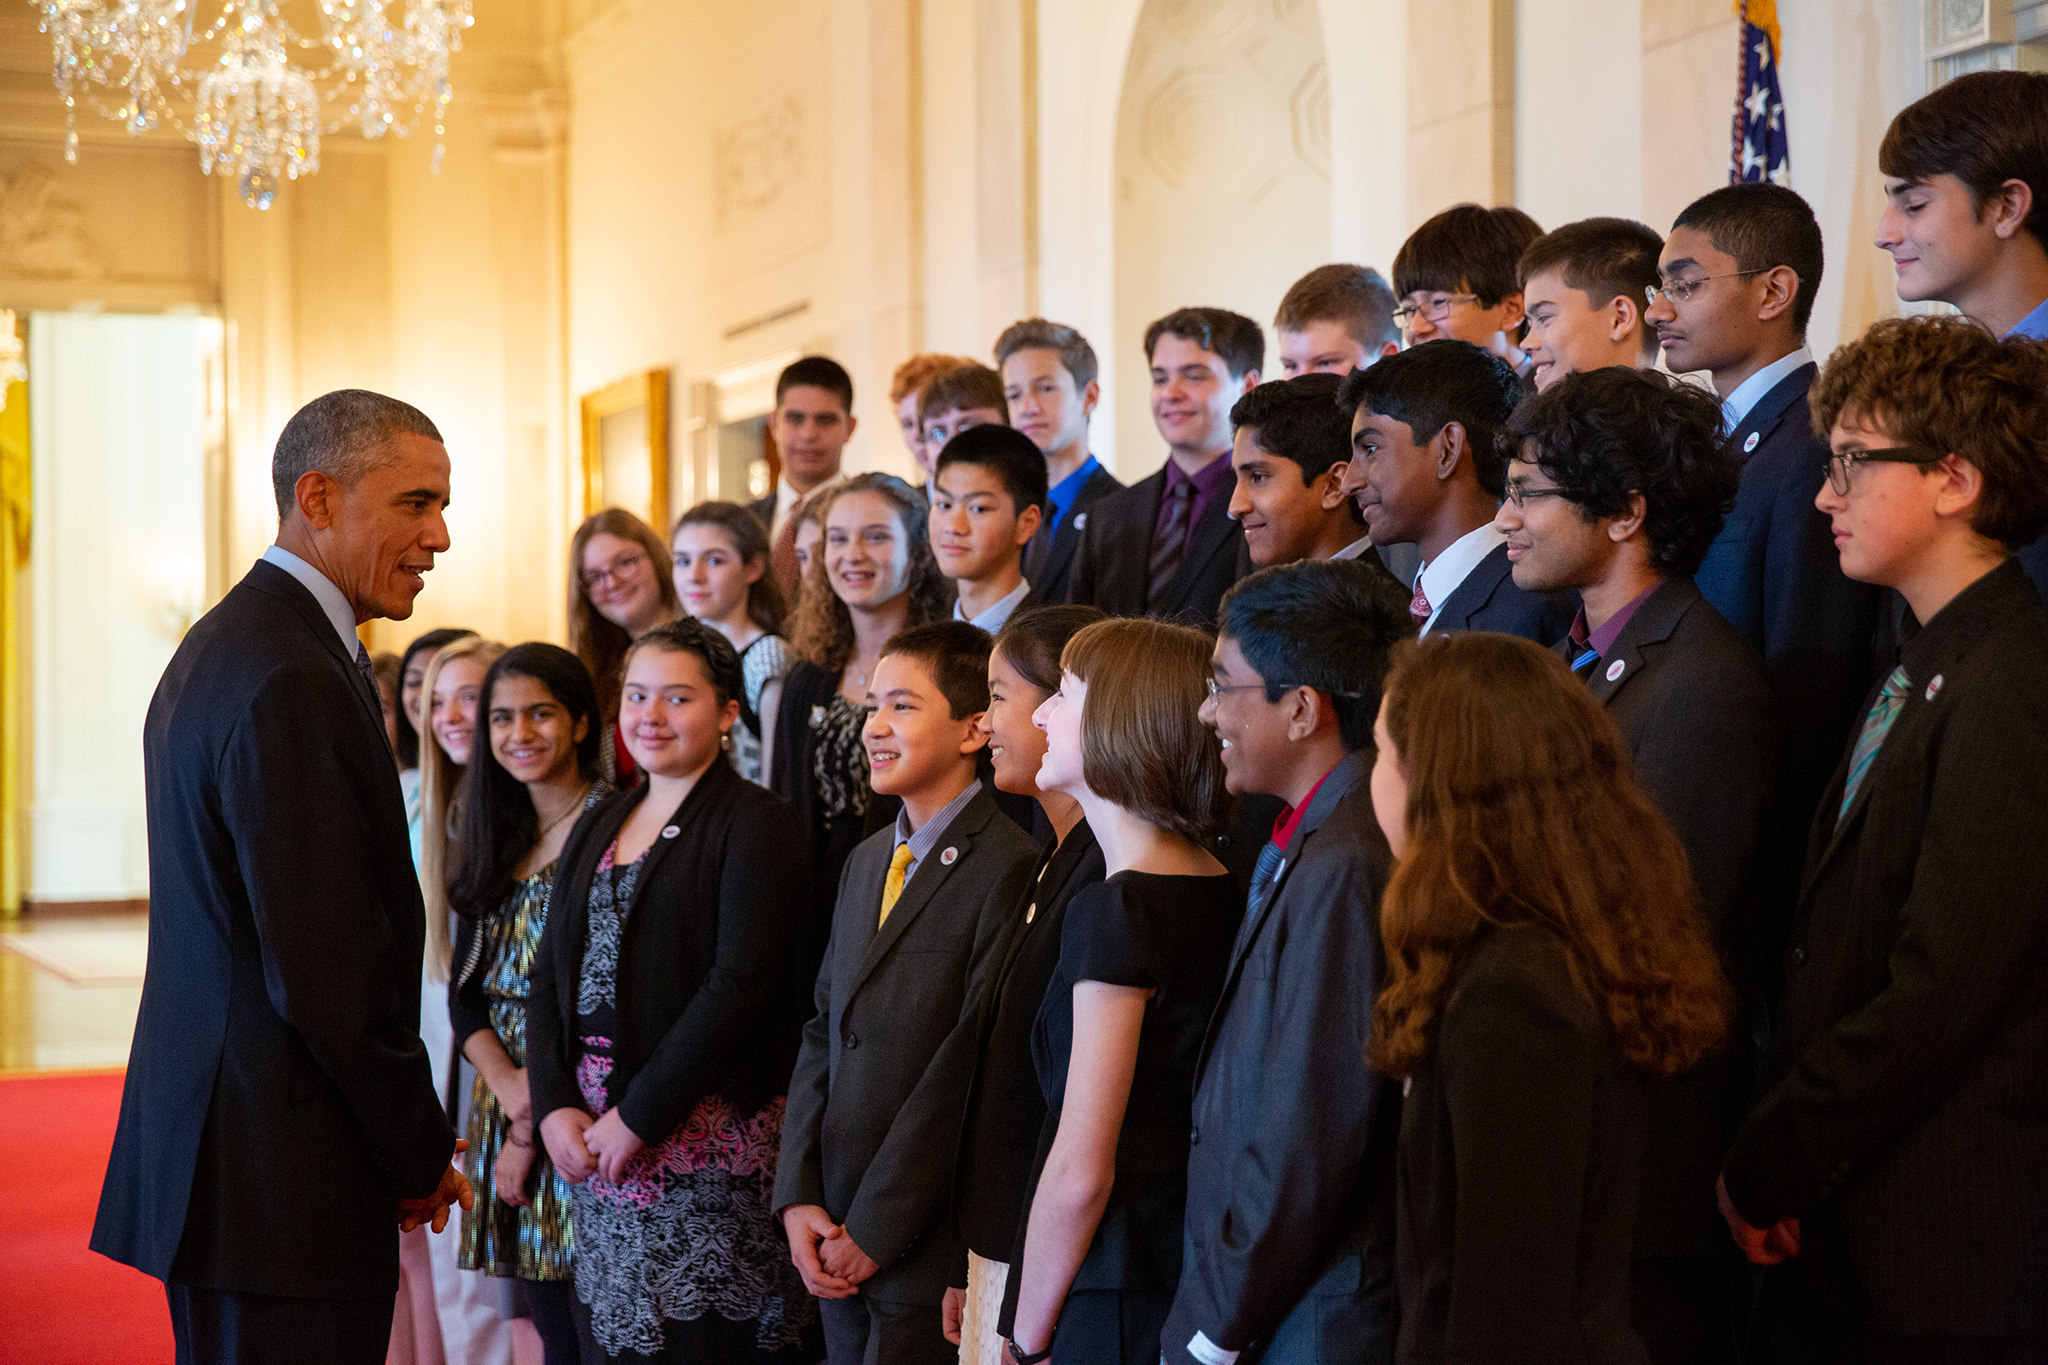 President Obama welcomes Broadcom MASTERS finalists to the White House